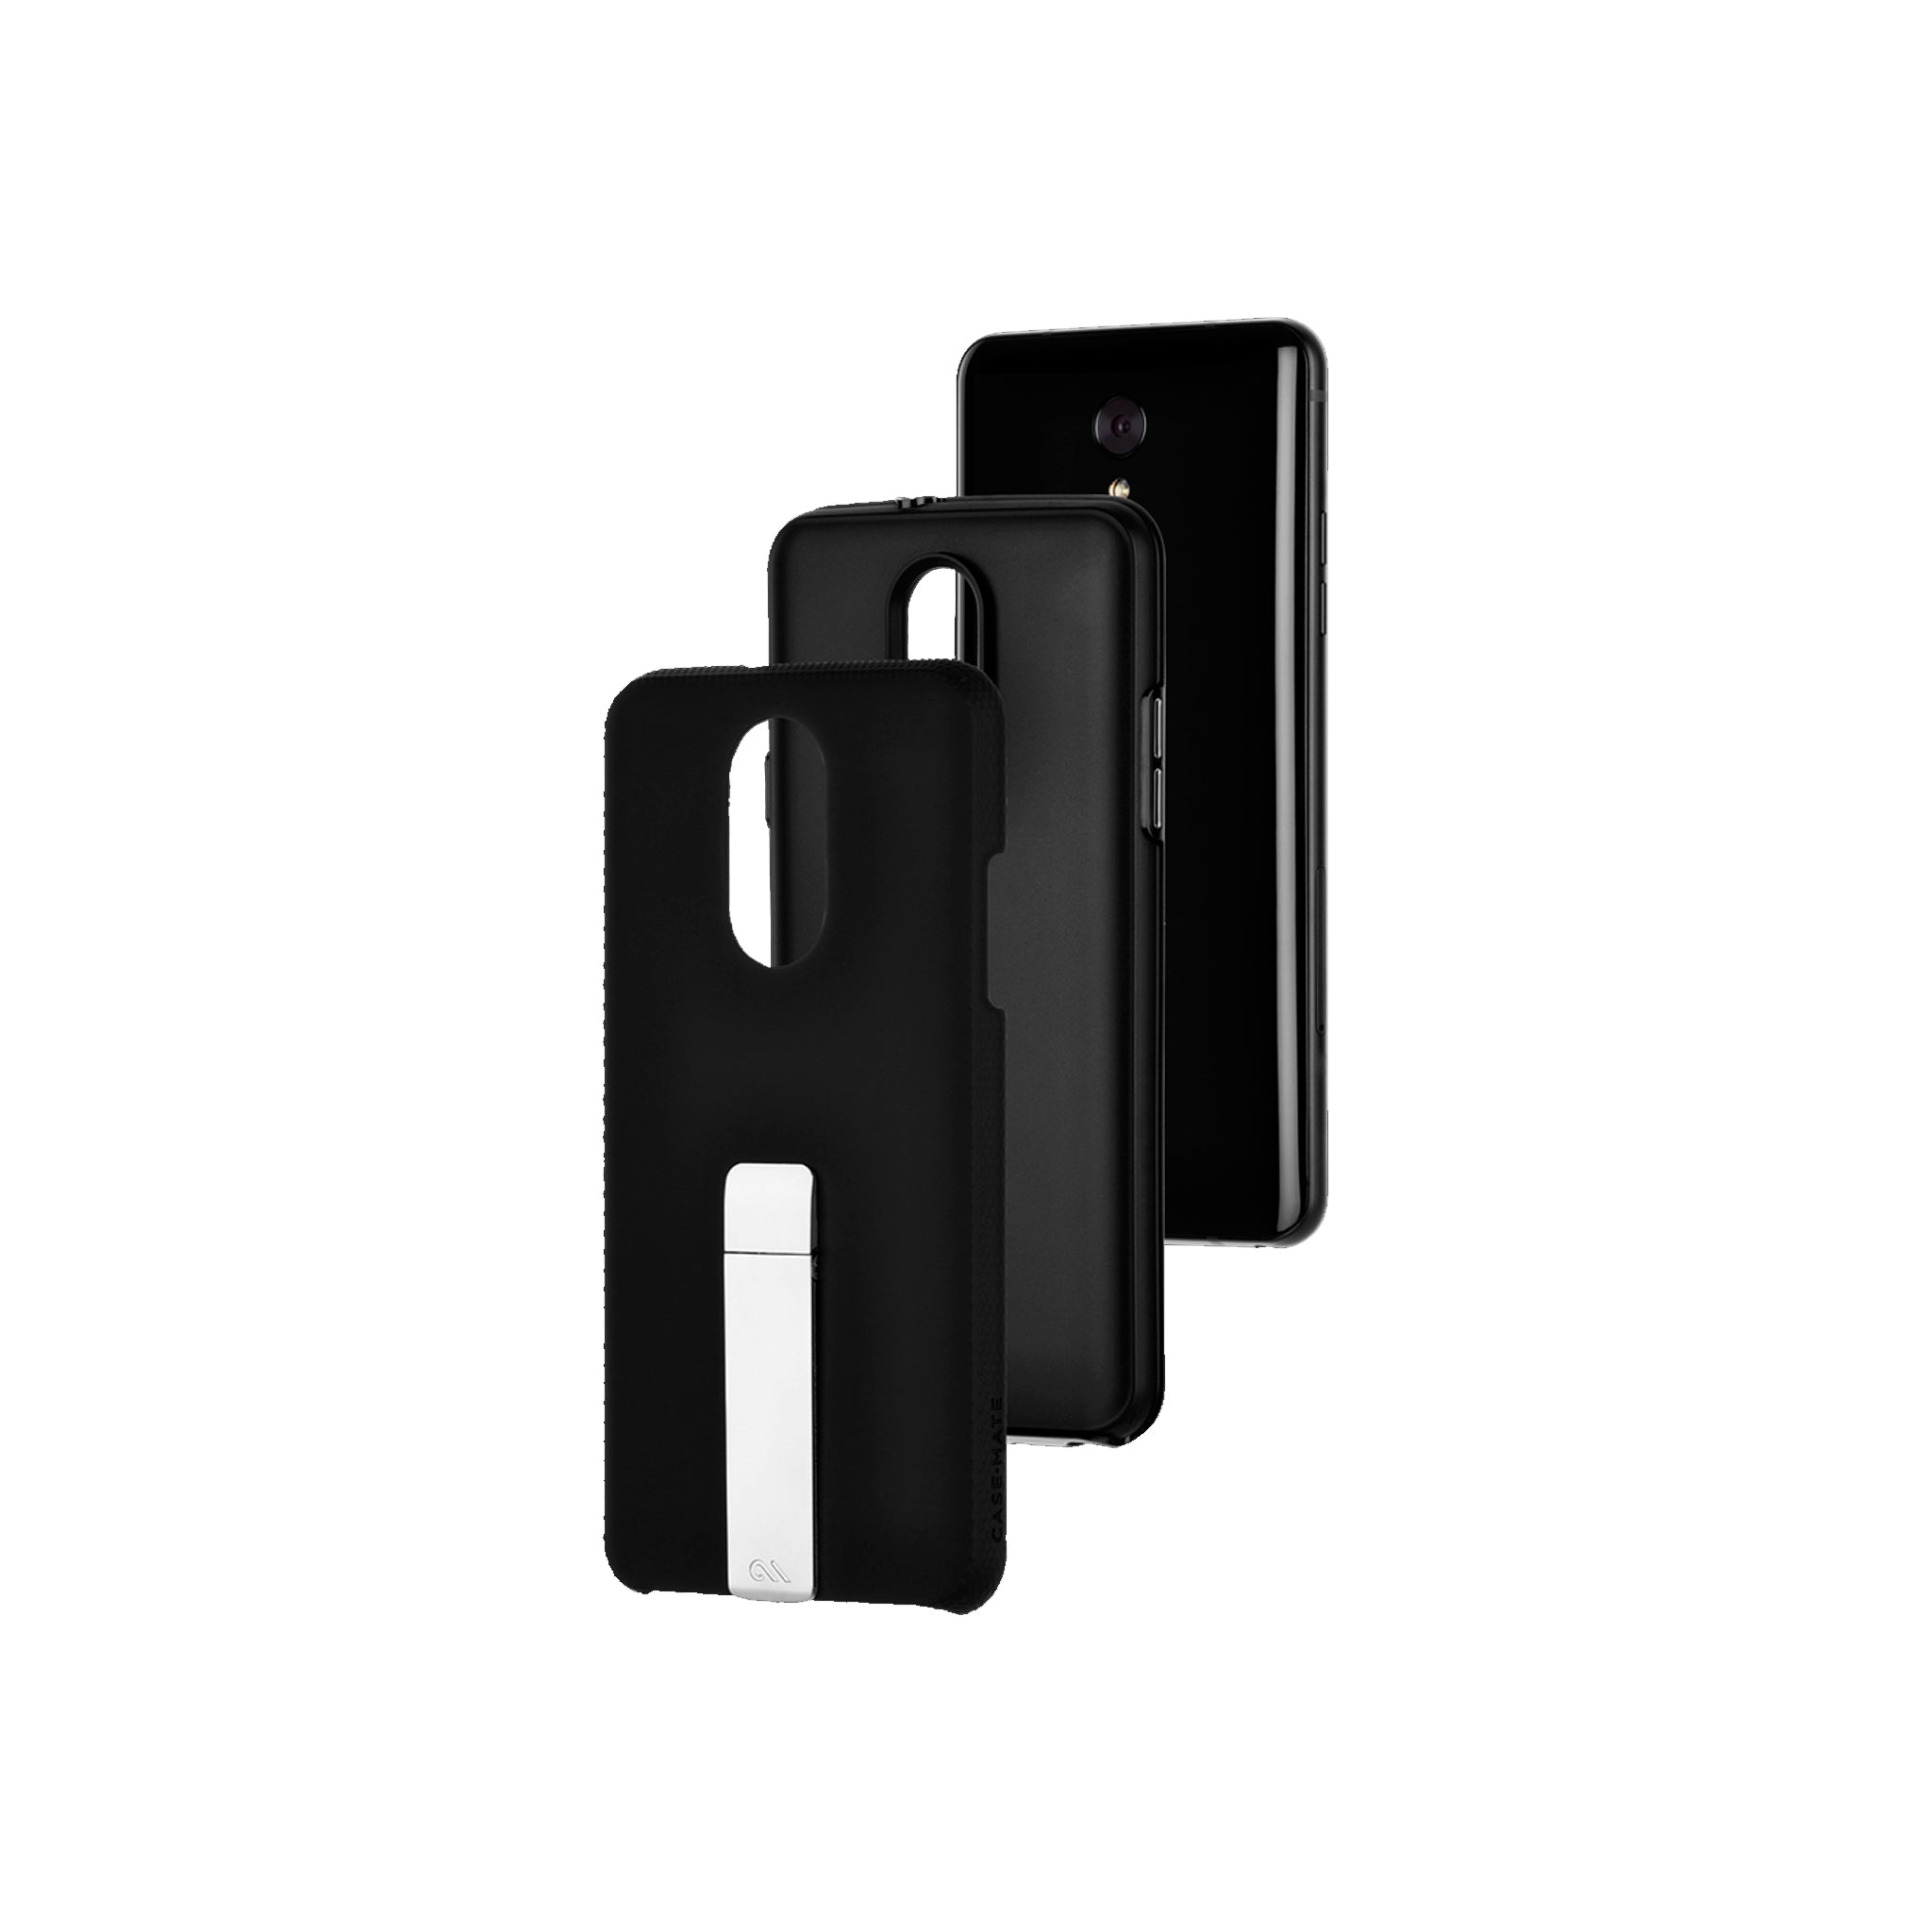 Case-mate - Tough Stand Case For Lg Stylo 5 - Black